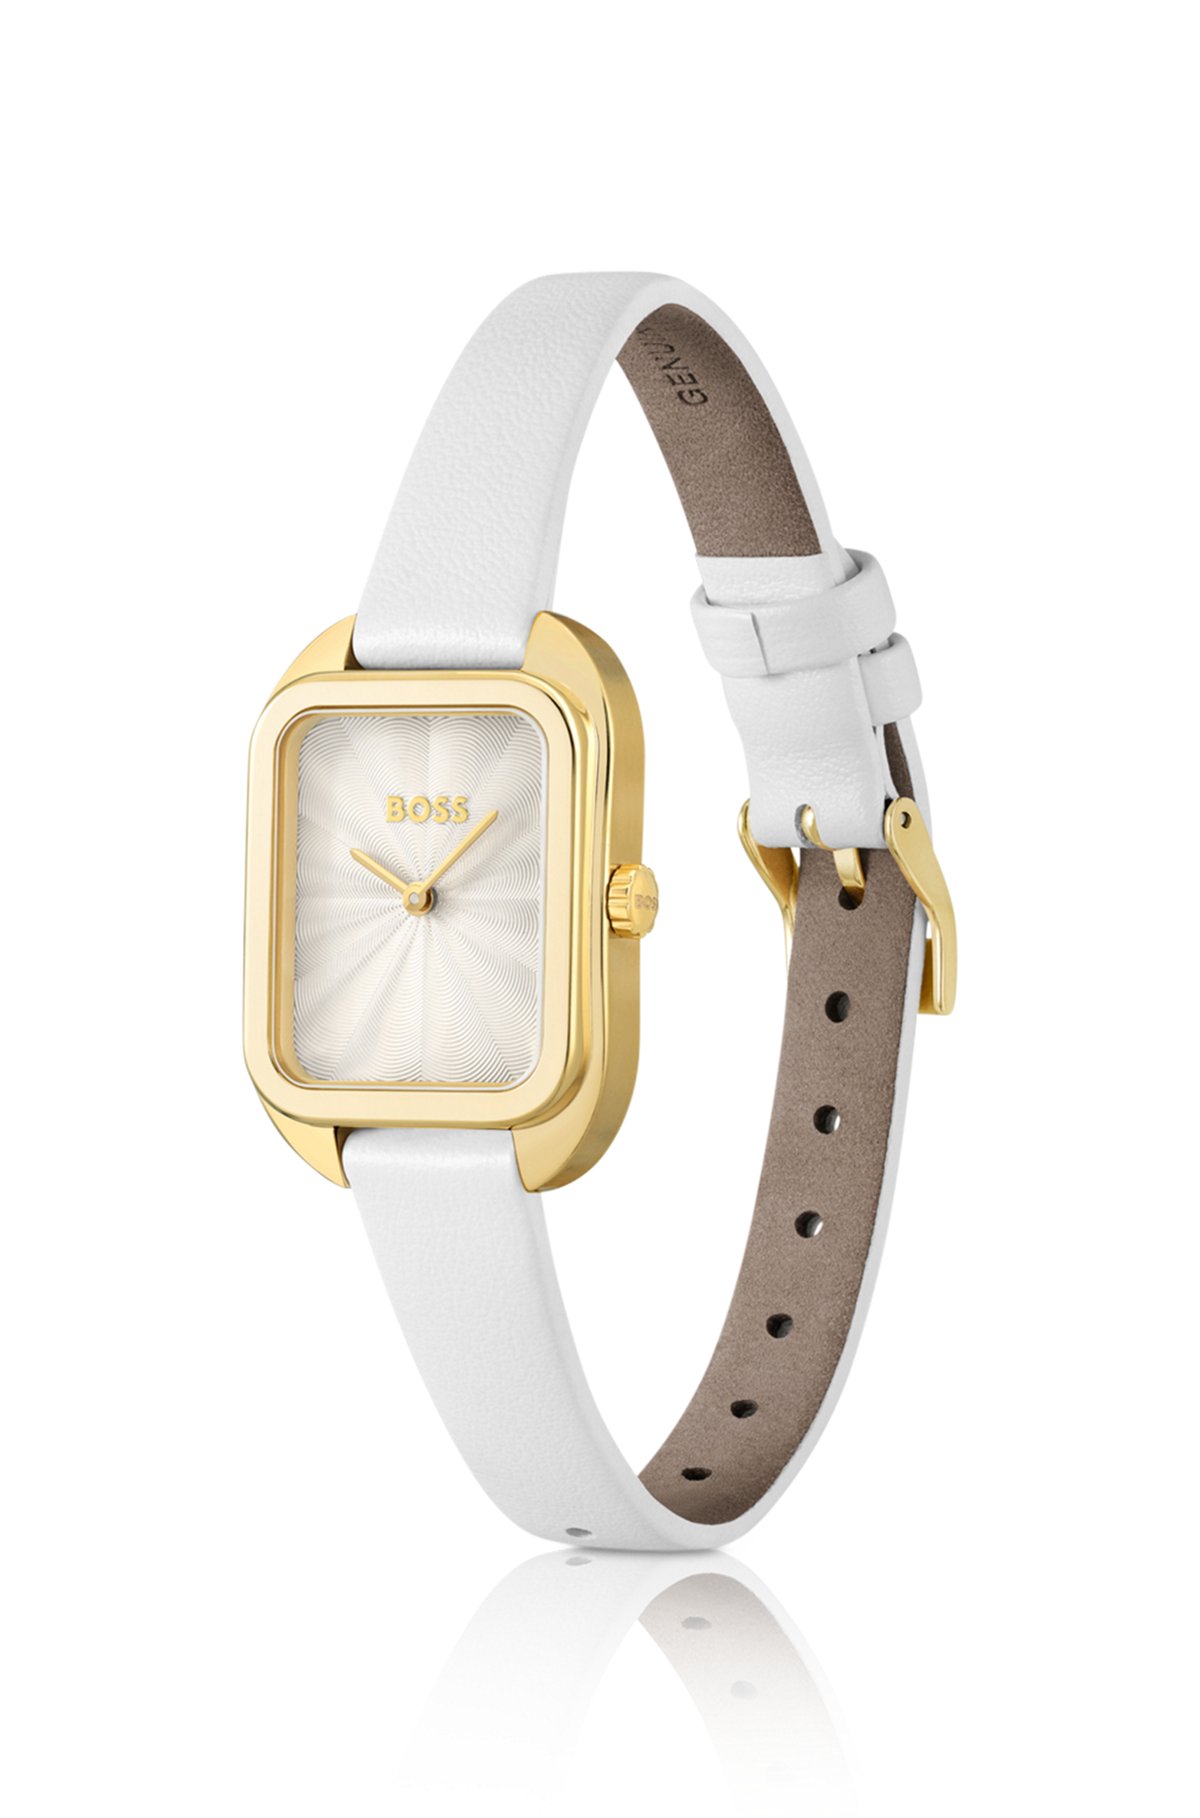 Gold-tone rectangular watch with white leather strap, White